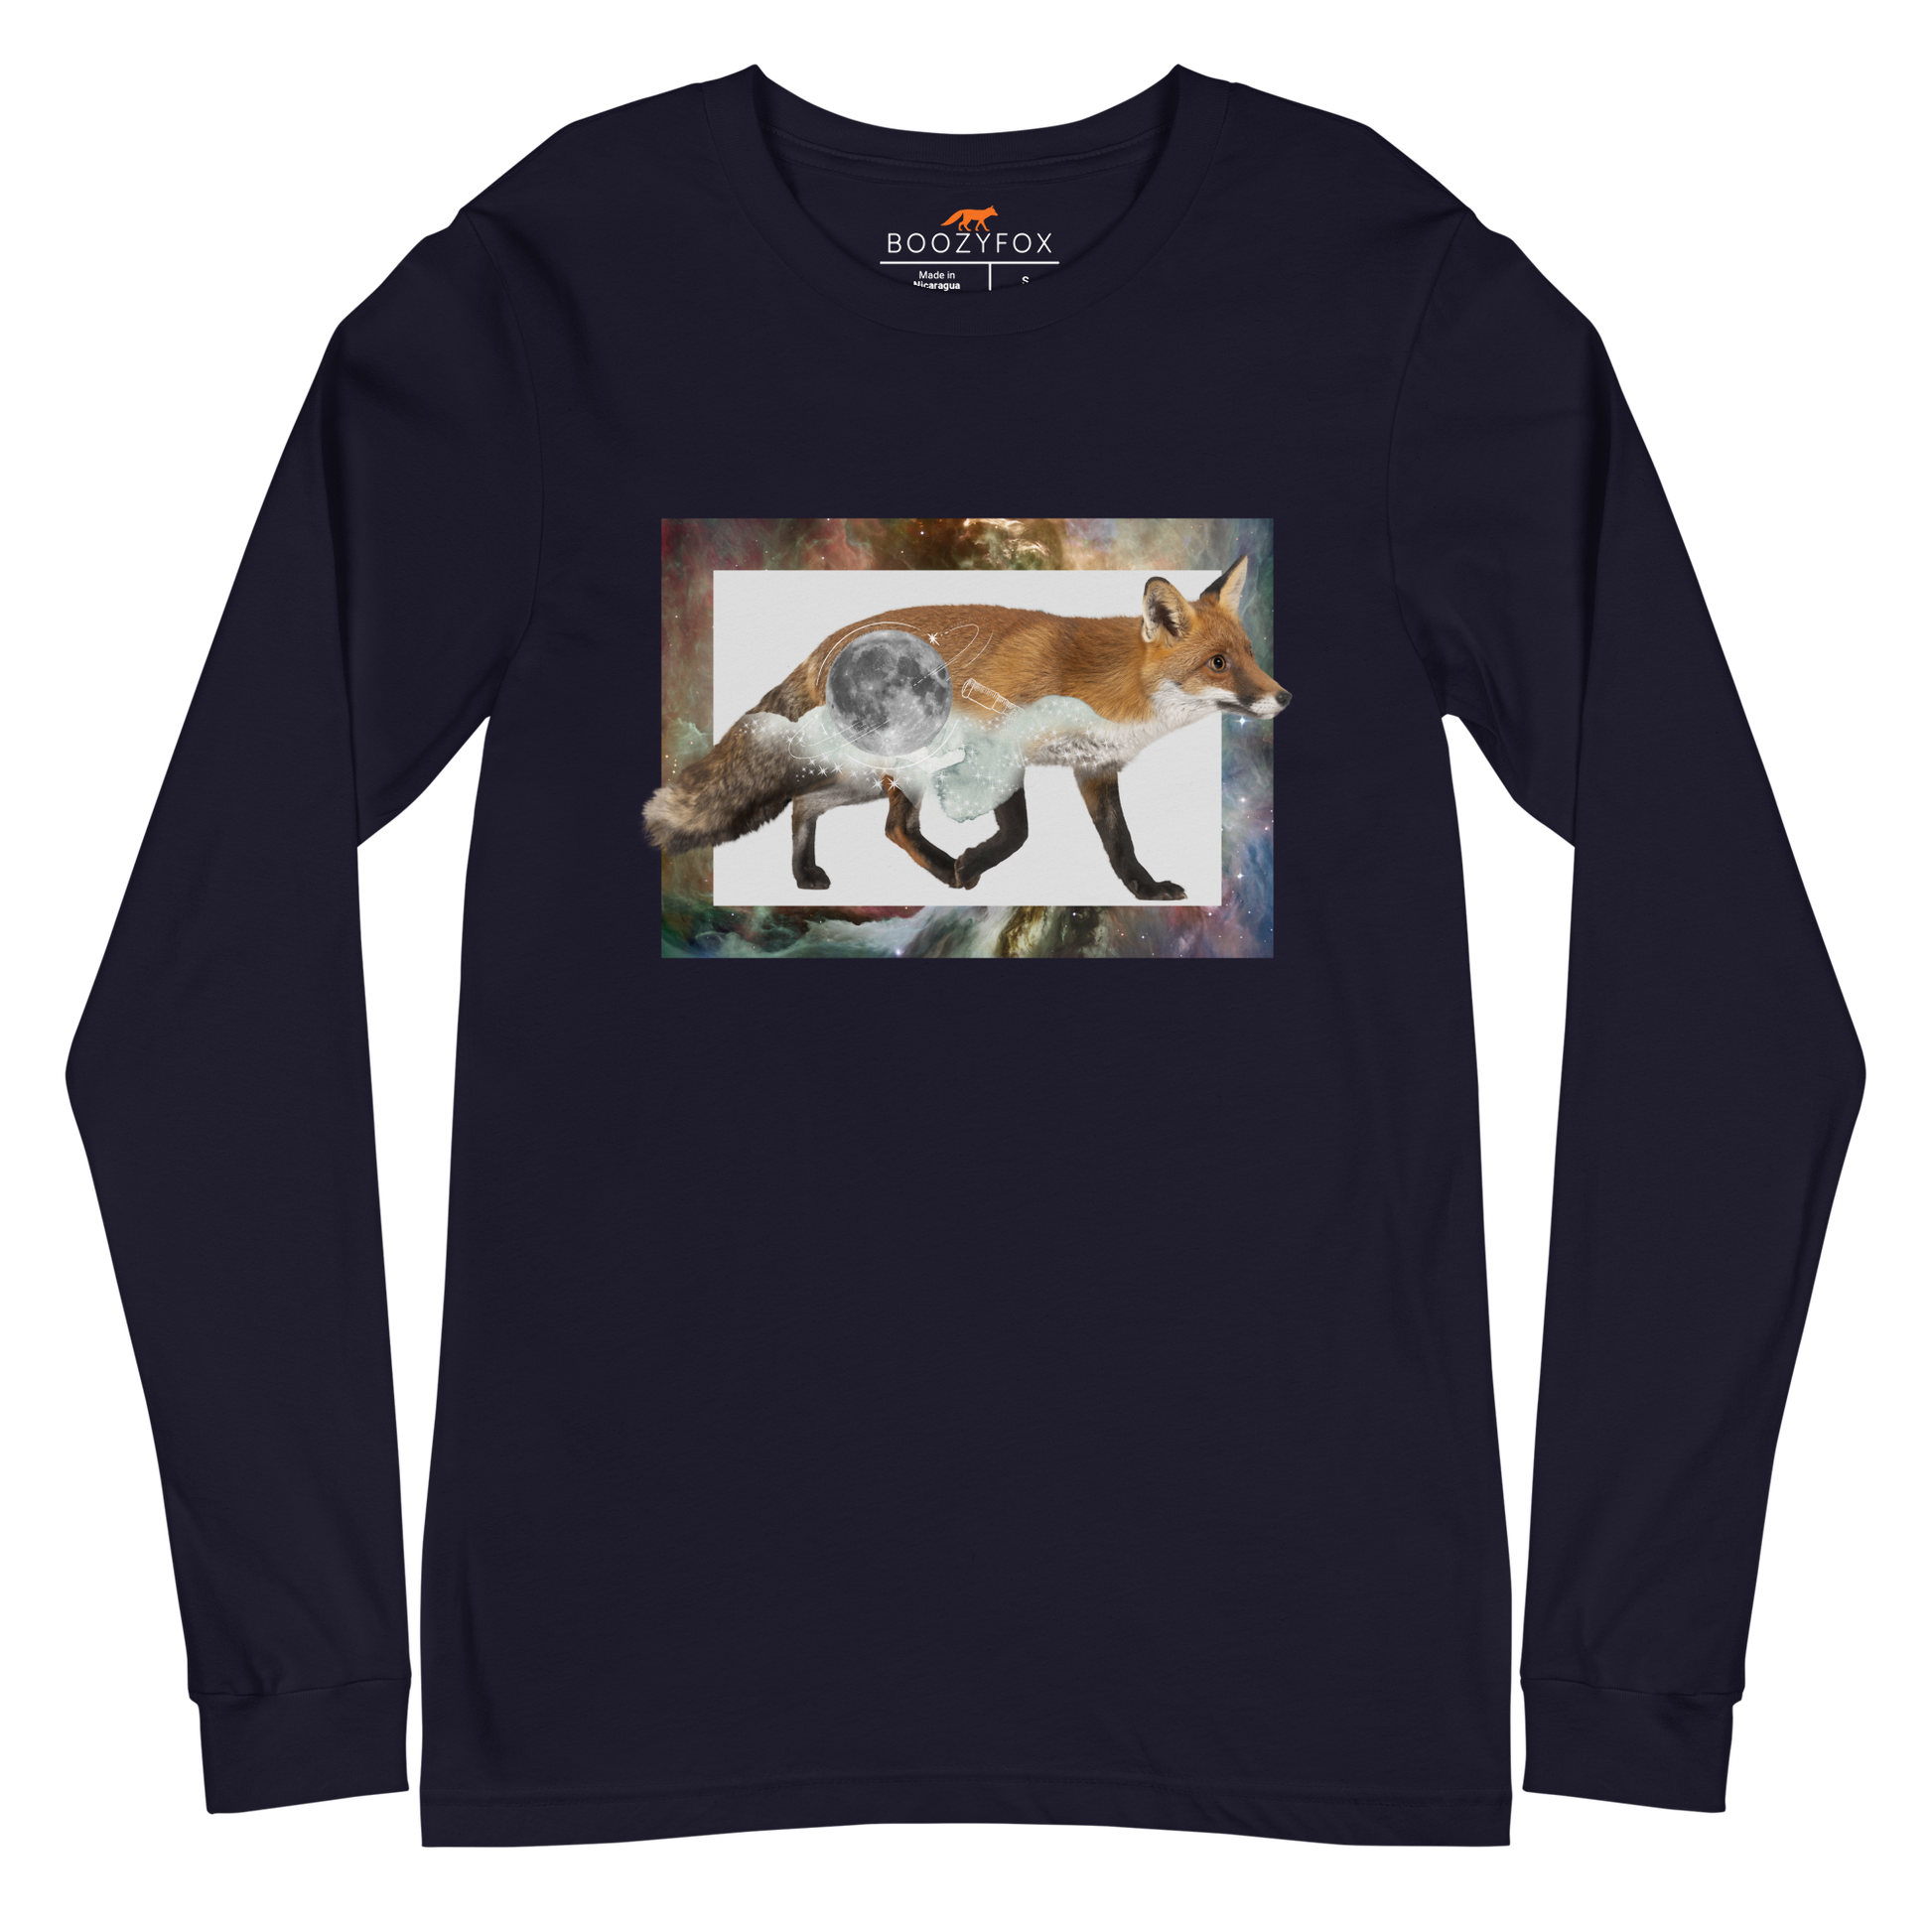 Navy Fox Long Sleeve Tee featuring a mesmerizing Space Fox graphic on the chest - Cool Fox Long Sleeve Graphic Tees - Boozy Fox